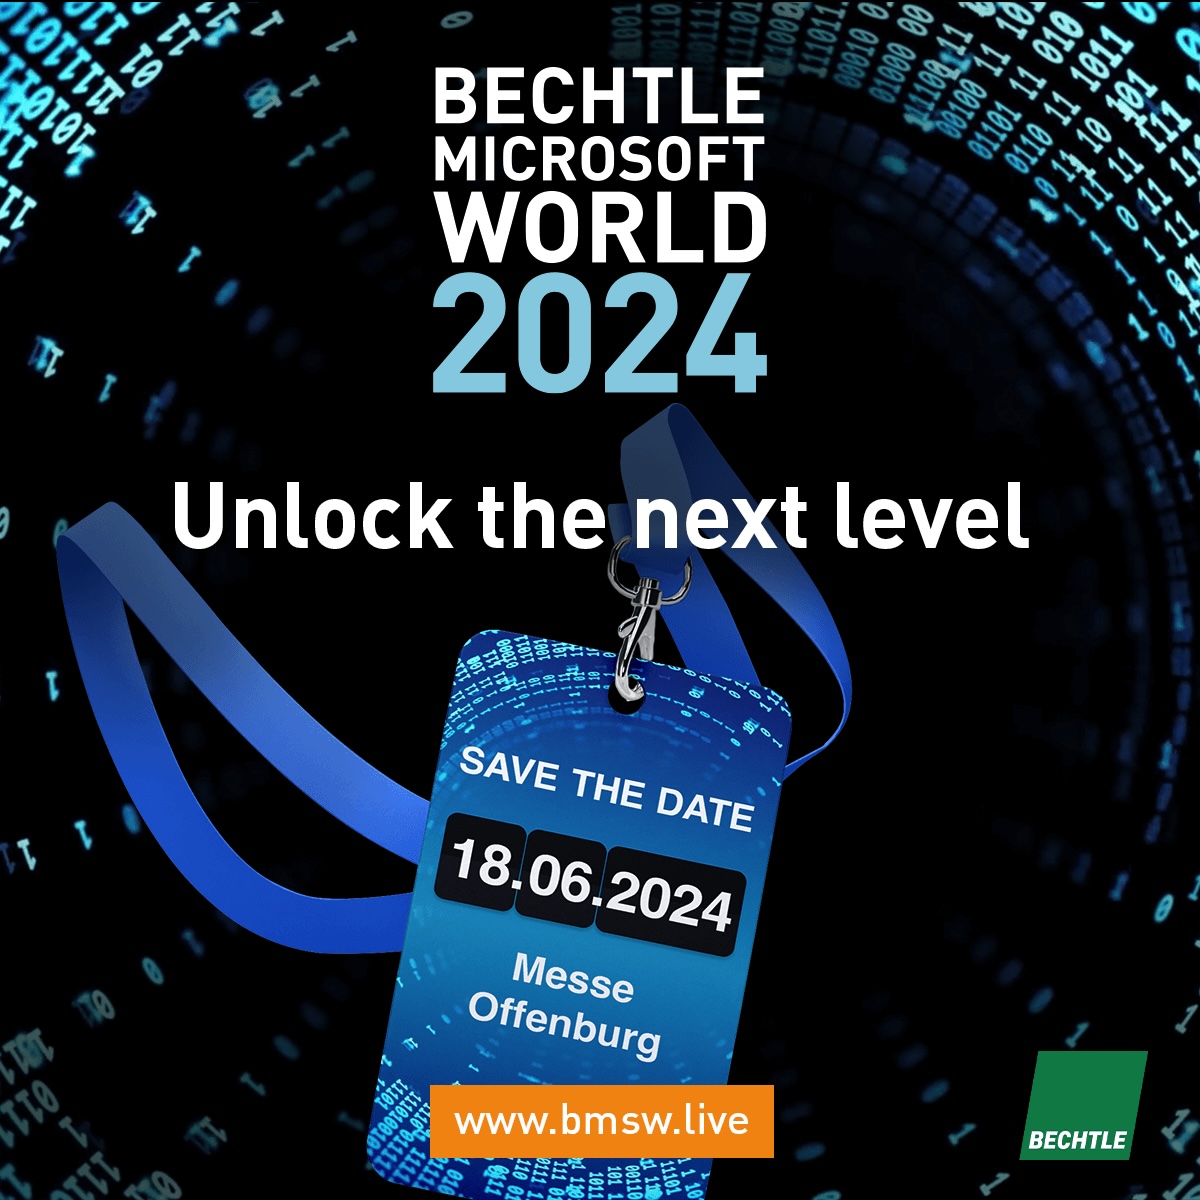 #UnlockTheNextLevel! 🔐 Take part in one of the biggest @Microsoft partner events in Europe: The Bechtle Microsoft World 2024 & get insights on modern work, #security, #Azure & business applications. ℹ️ Click here for more information about #BMSW2024: bit.ly/4bvSy8r